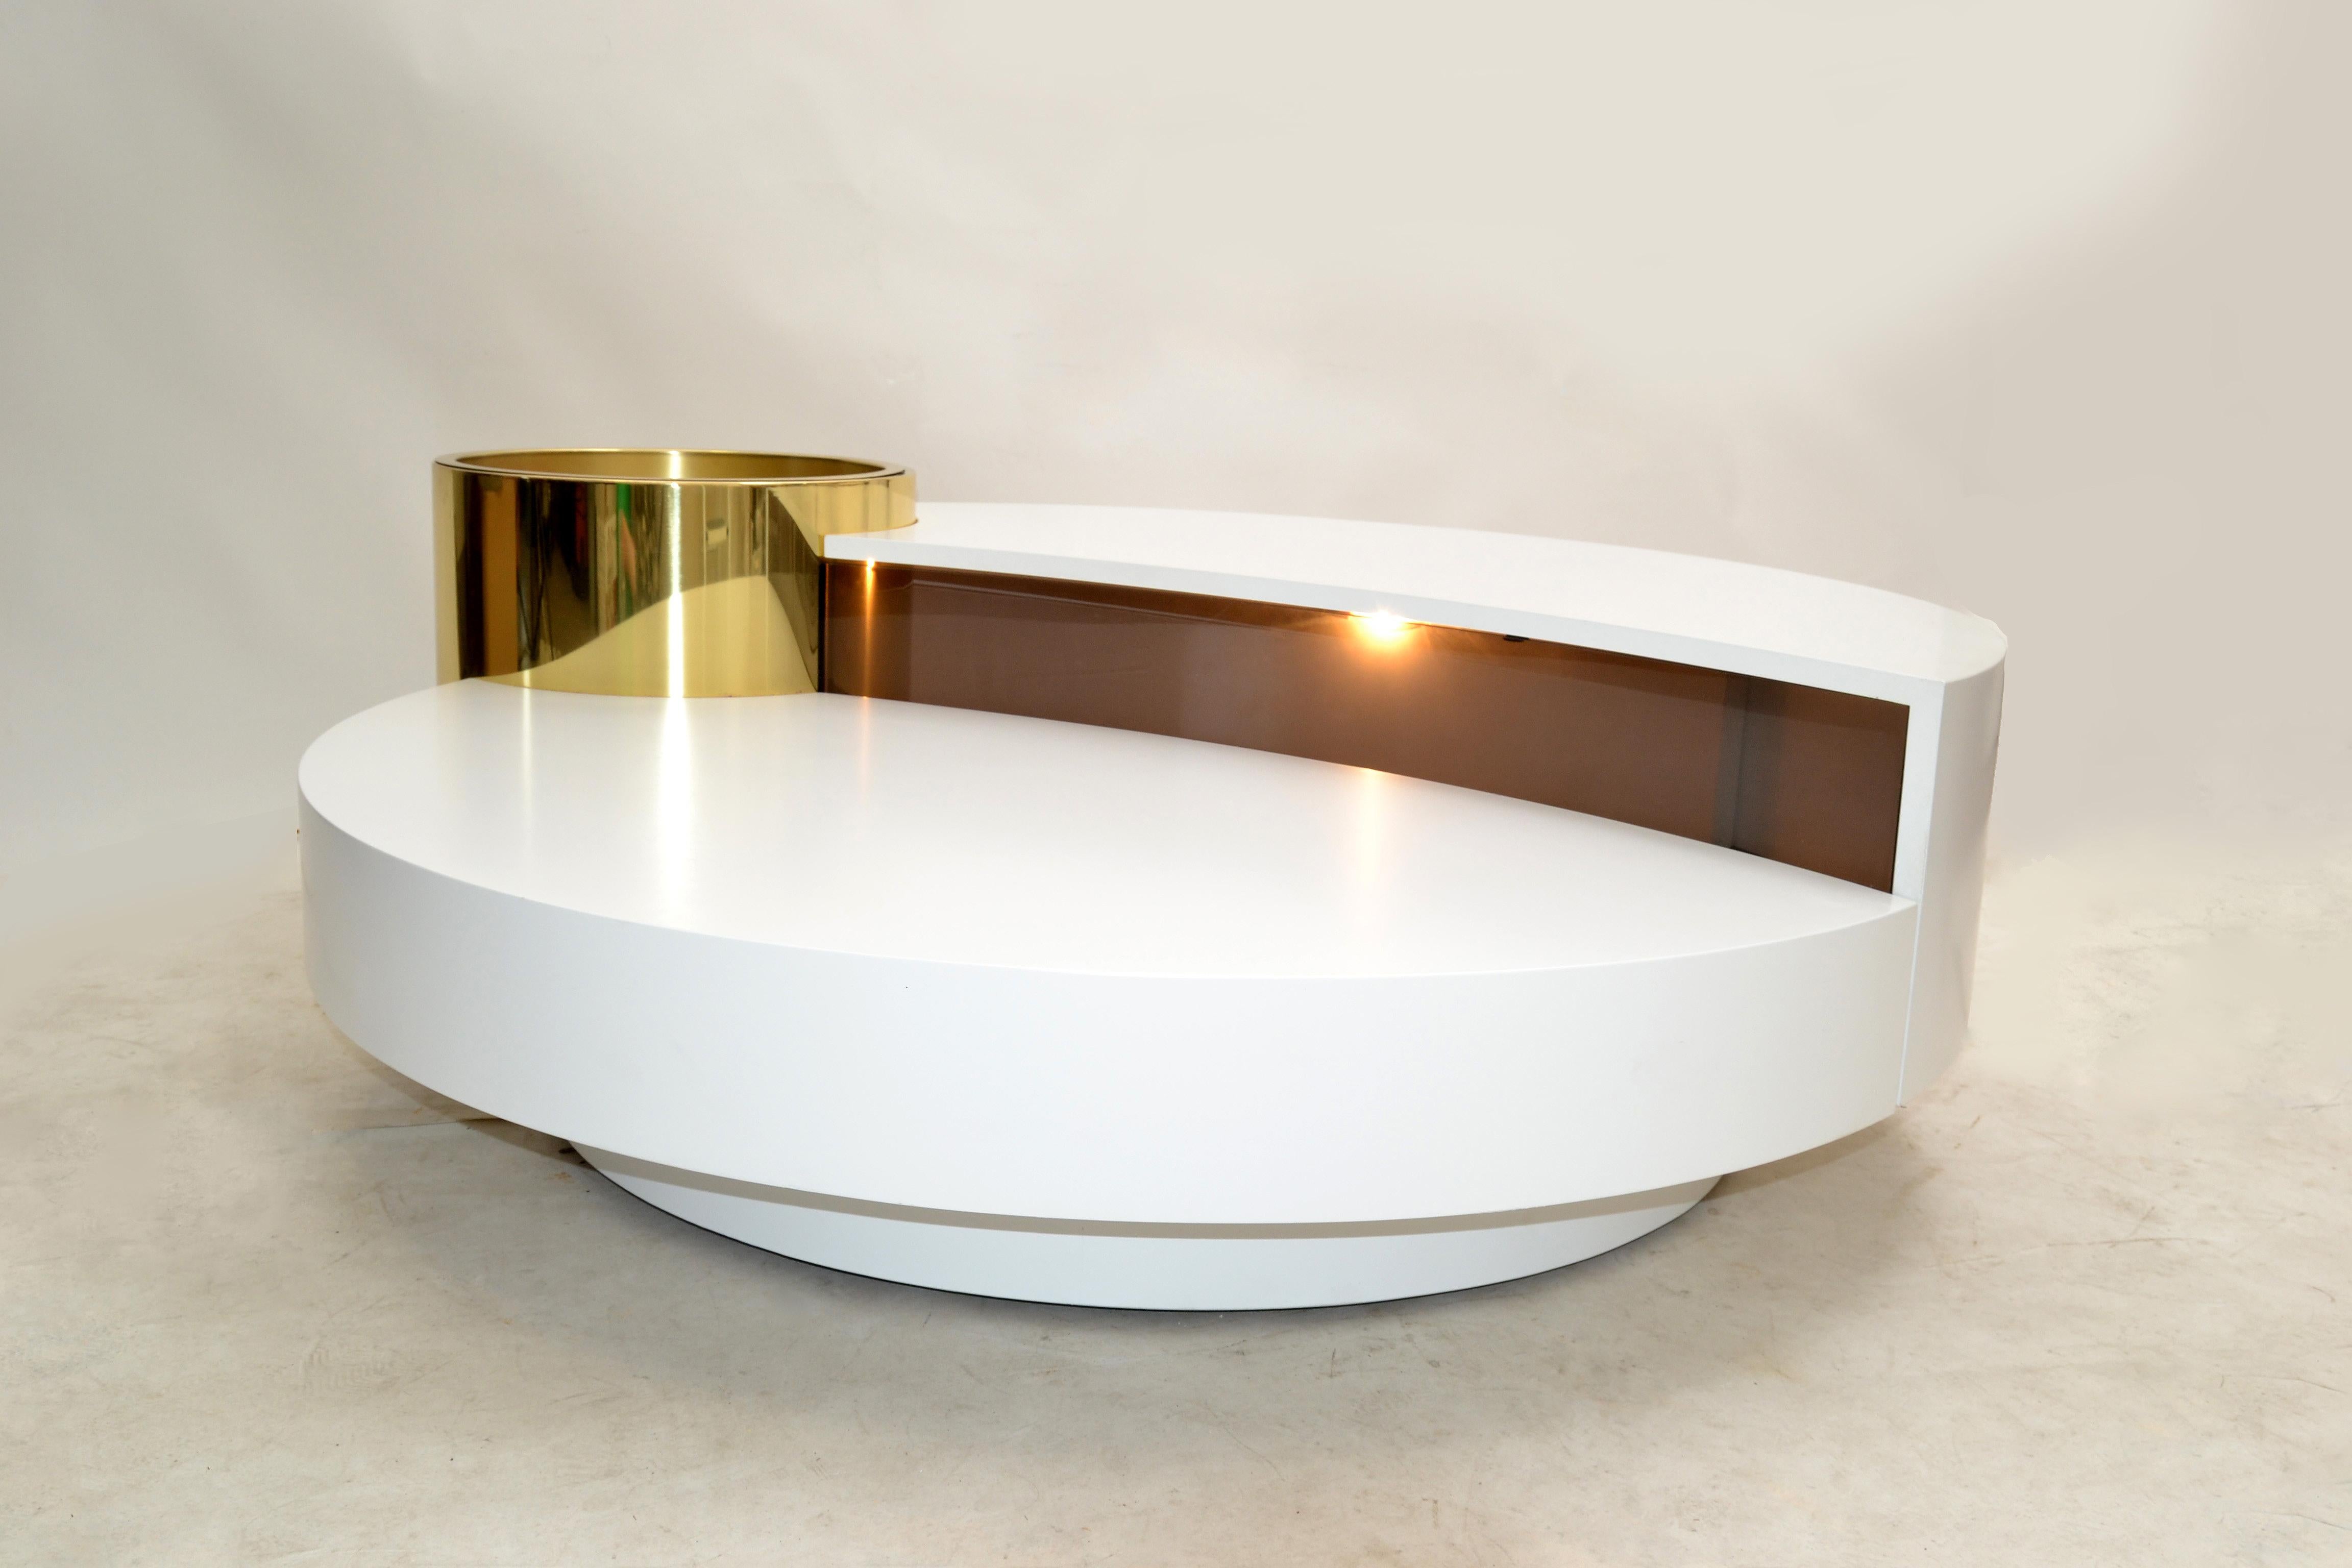 Original Massimo Papiri rotating wood and brass coffee table with dry bar manufactured by Mario Sabot in Italy, circa 1970.
The interior is illuminated and exposed through a smoked Lucite shield.
The round brass compartment for the ice bucket or